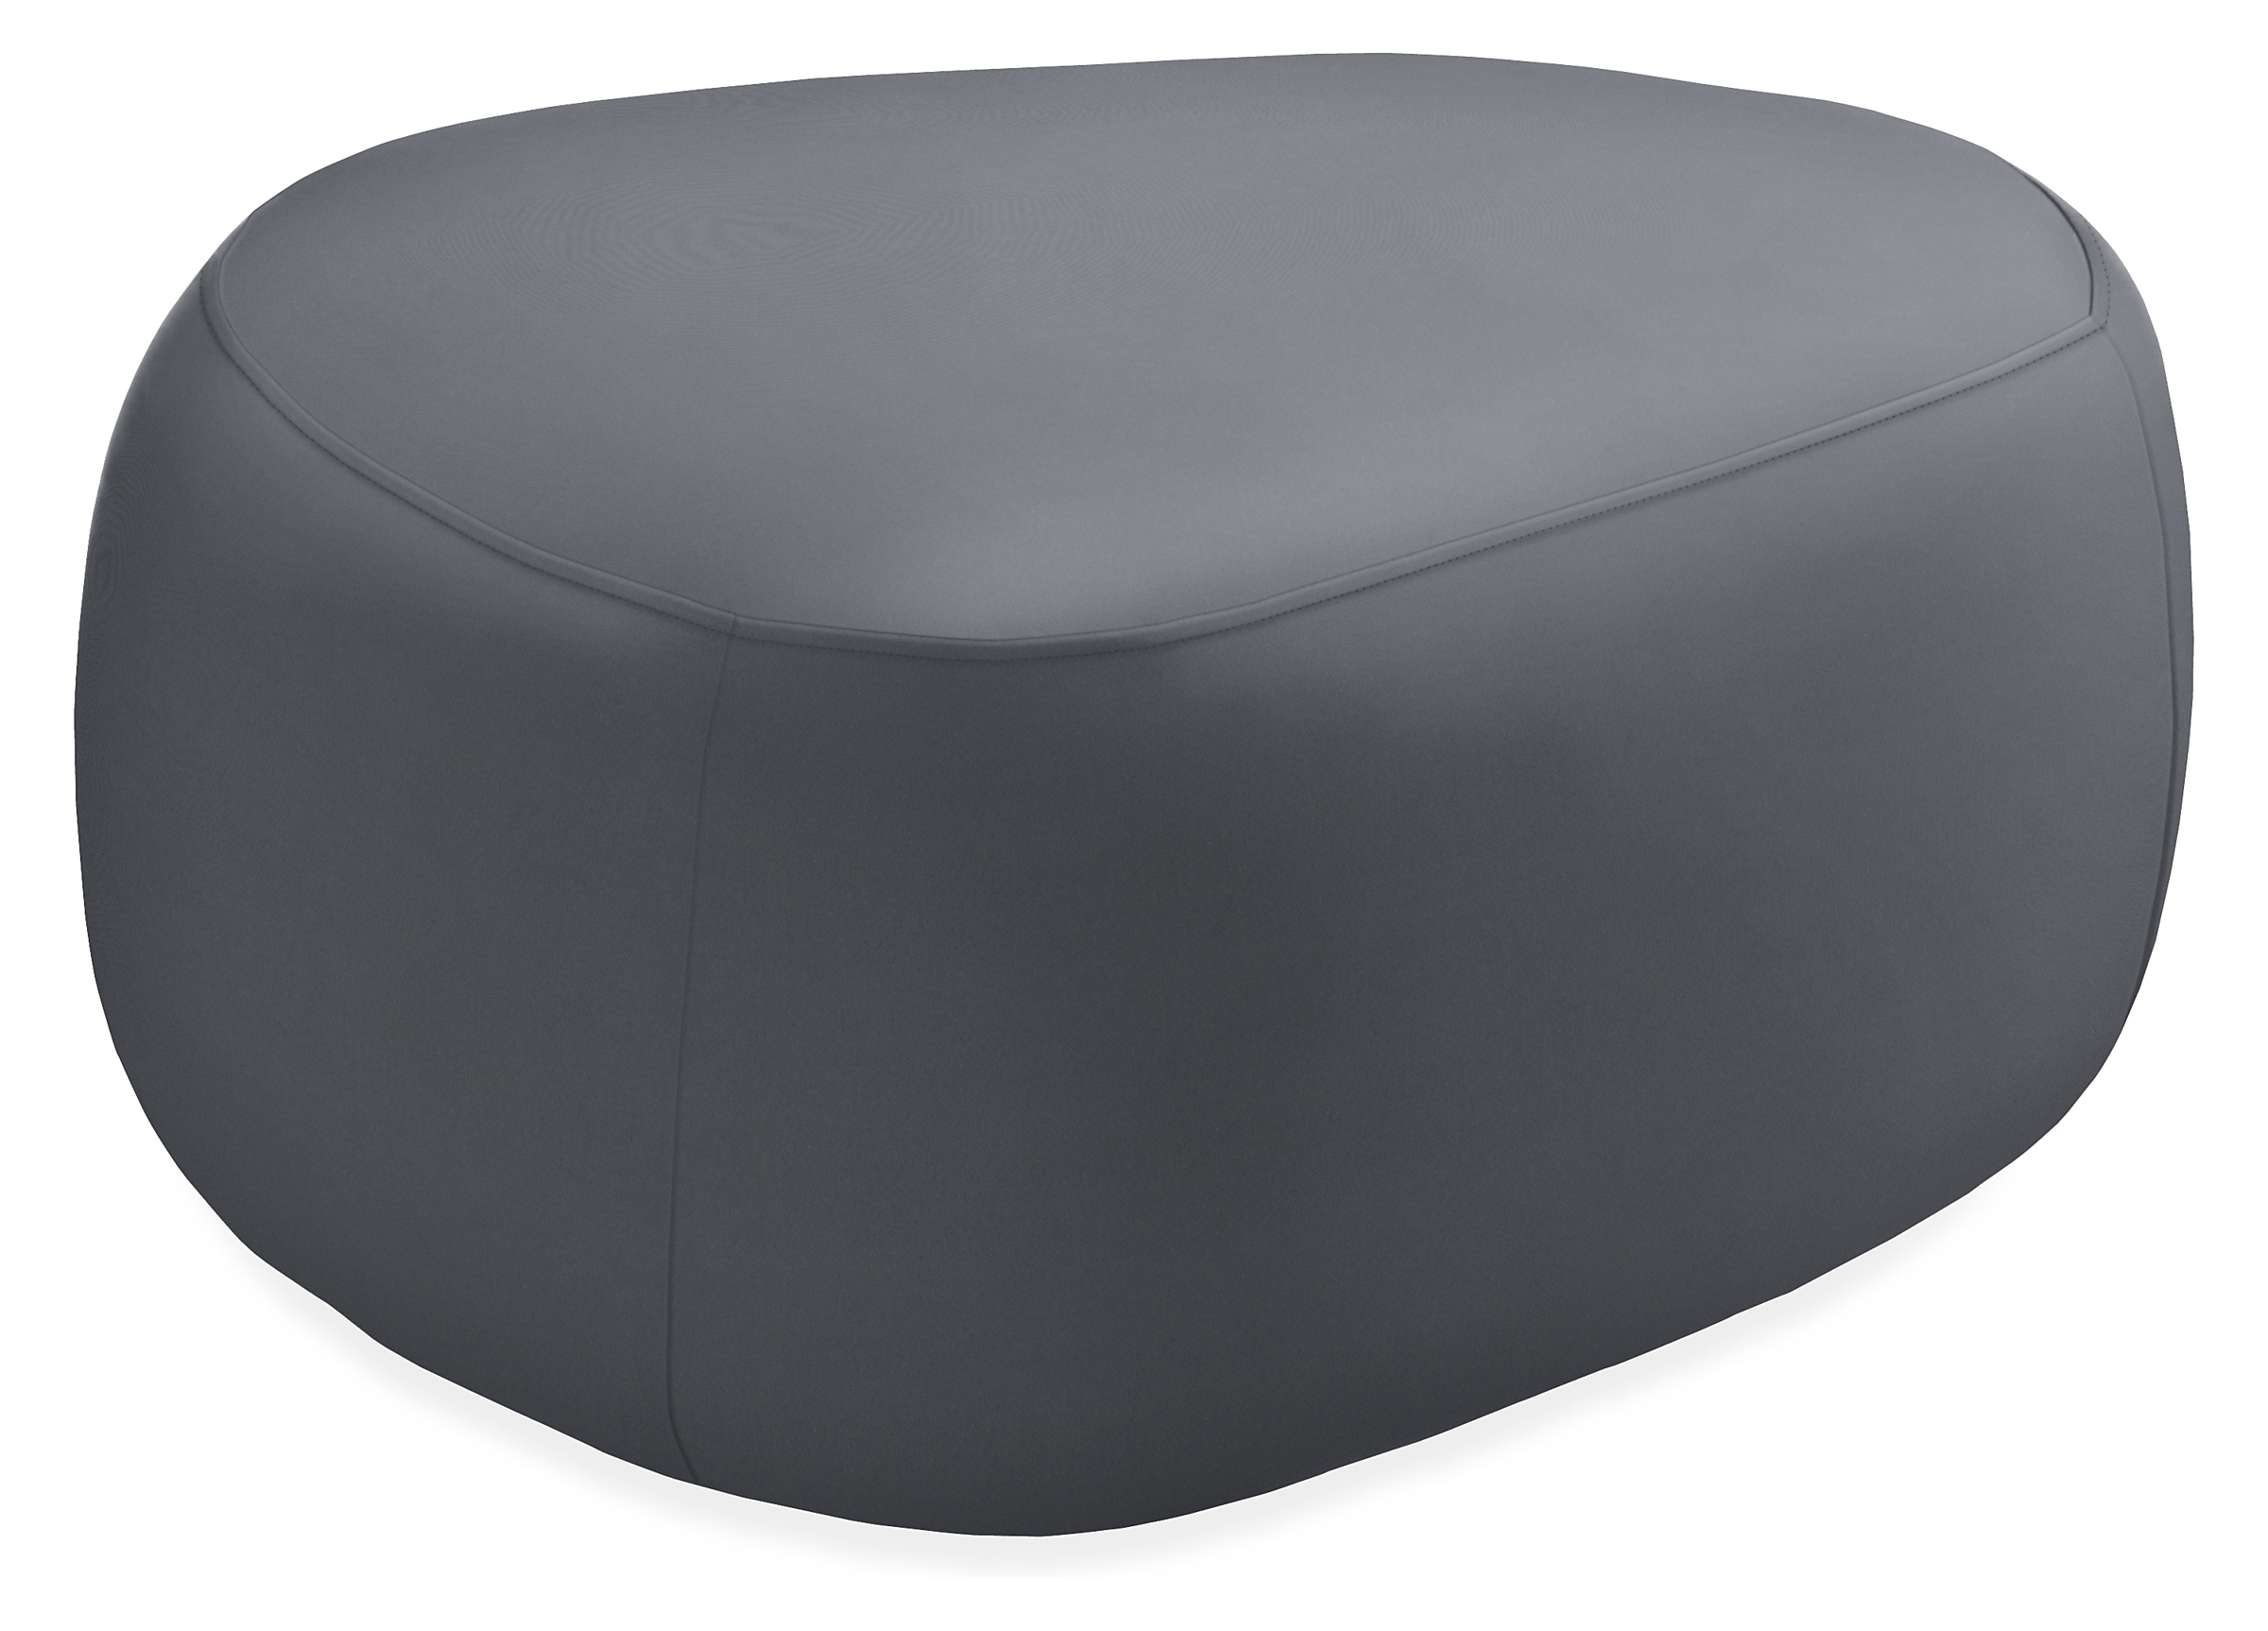 Stratford 32w 25d 15h Ottoman in Tristan Charcoal